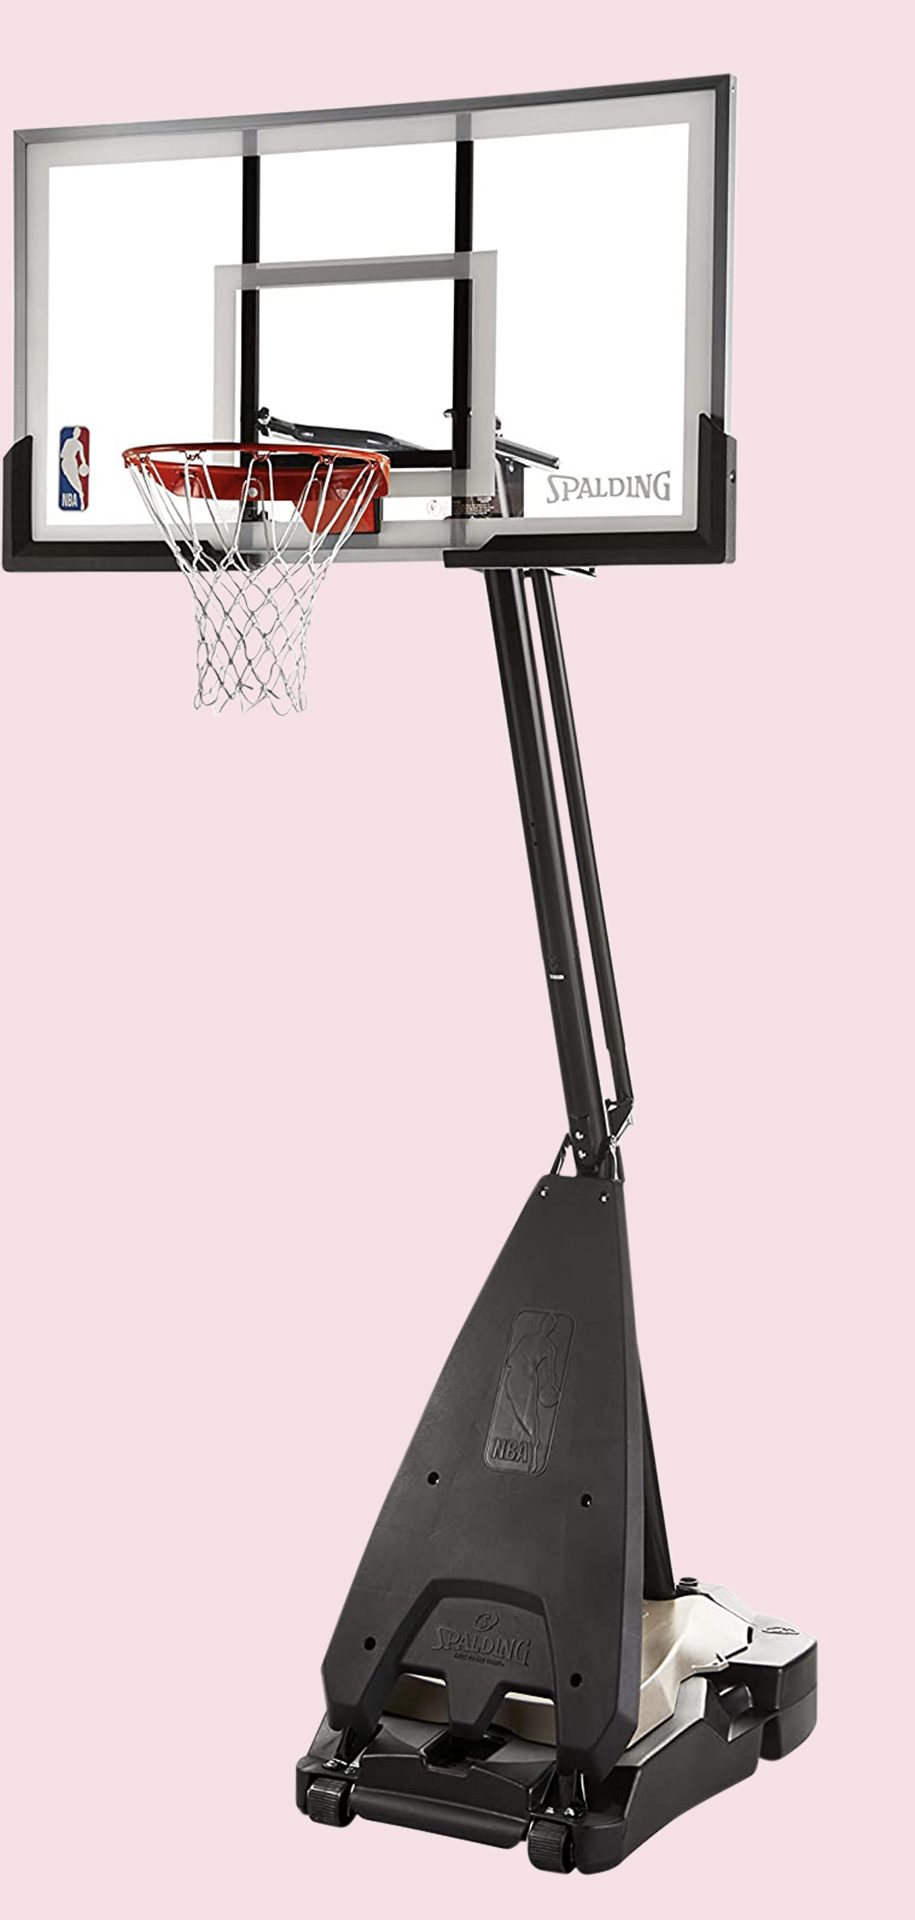 Top 10 Best Affordable Basketball Hoops Reviews – Different Prices Levels For Your Needs